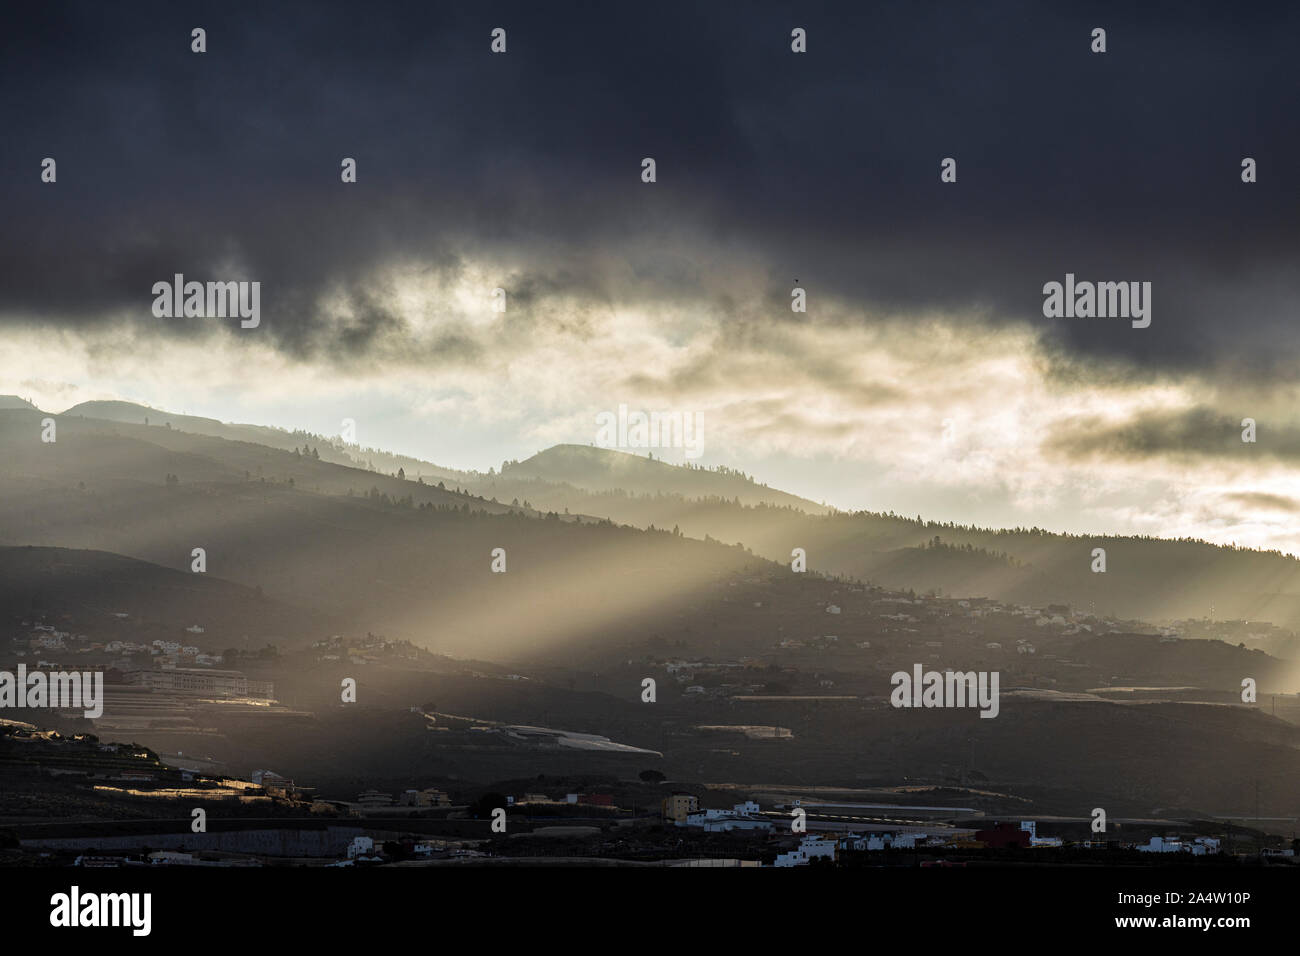 Early morning sunlight breaks through the clouds over the mountains sending rays of light on to the land below, Guia de Isora, Tenerife, Canary Island Stock Photo